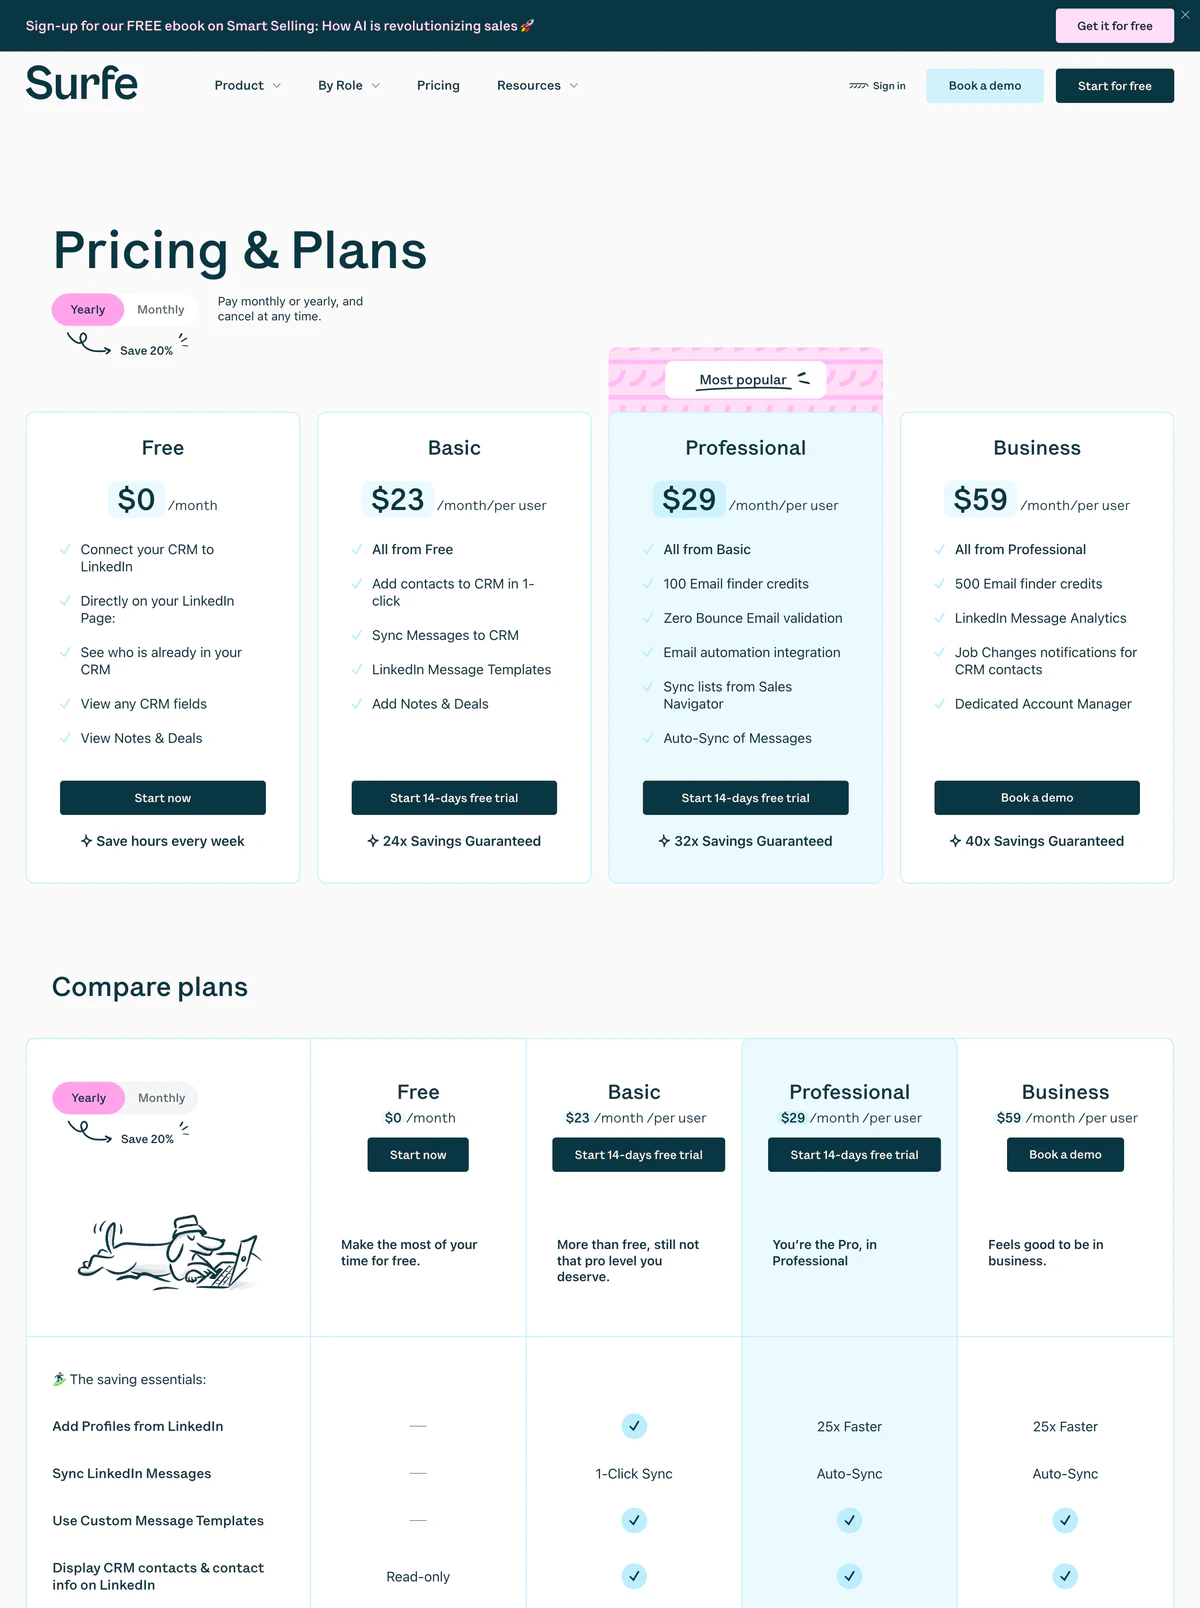 Pricing Page Example Surfe